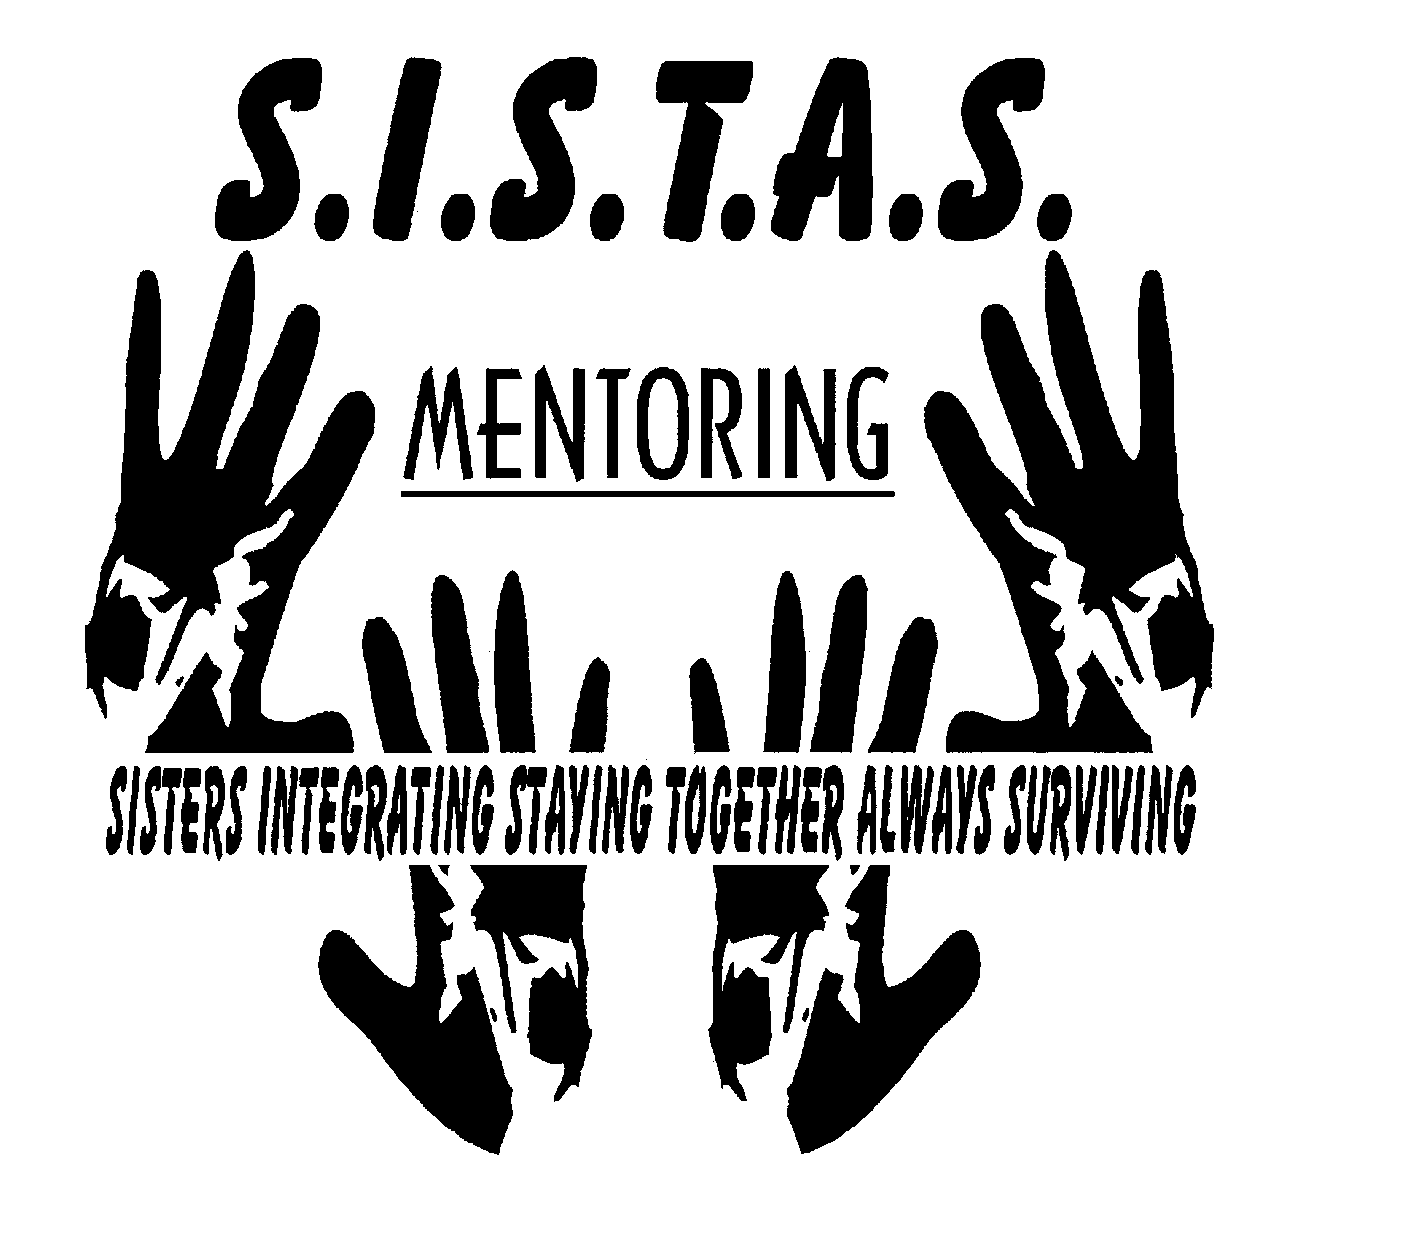  S.I.S.T.A.S. MENTORING SISTERS INTEGRATING STAYING TOGETHER ALWAYS SURVIVING